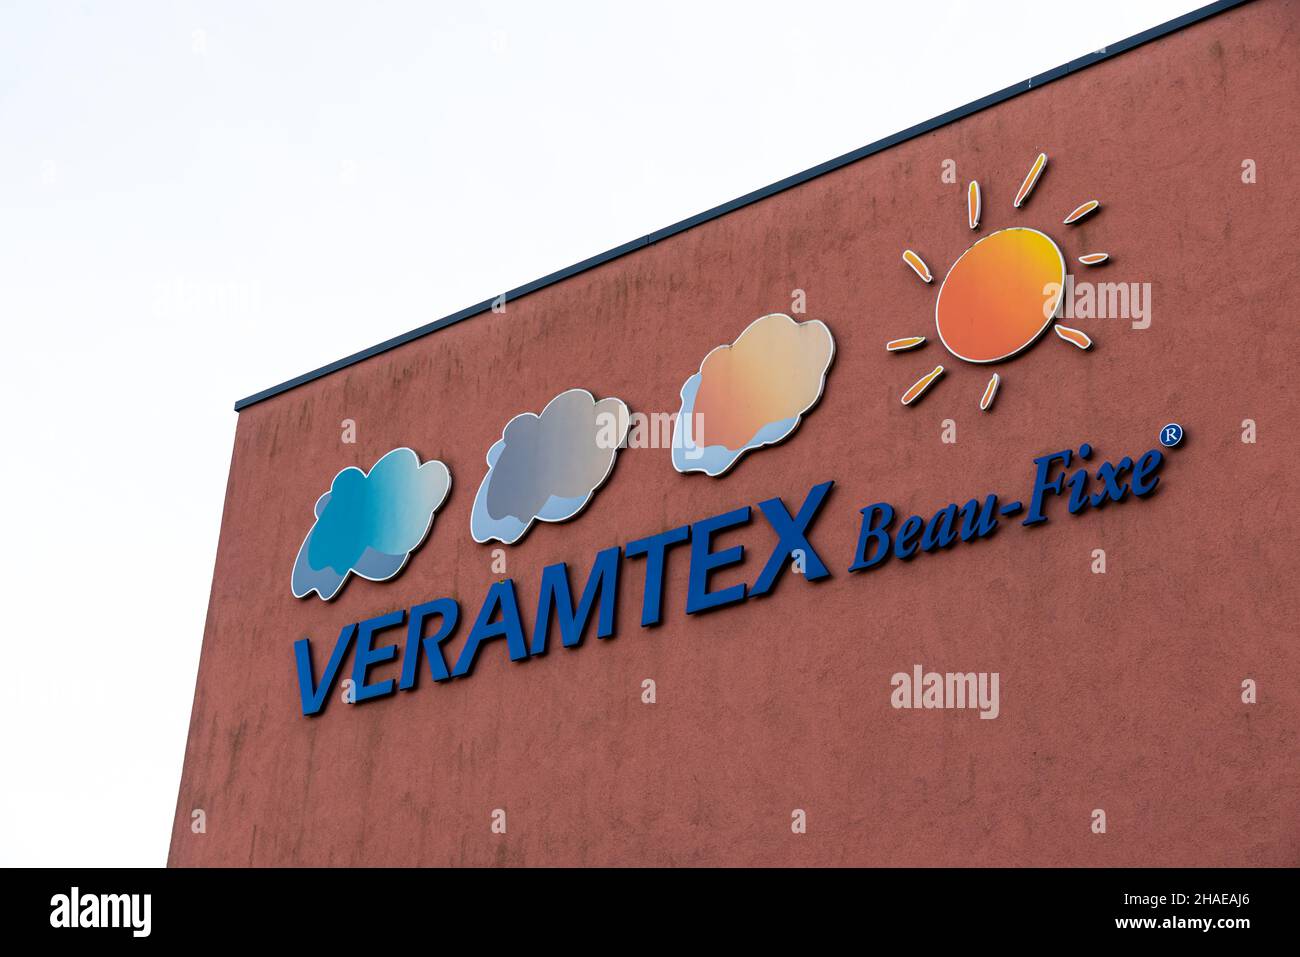 Neder-Over-Heembeek, Brussels, Belgium - 12 11 2021: The Veramtex company building, treating textile with ammonia Stock Photo